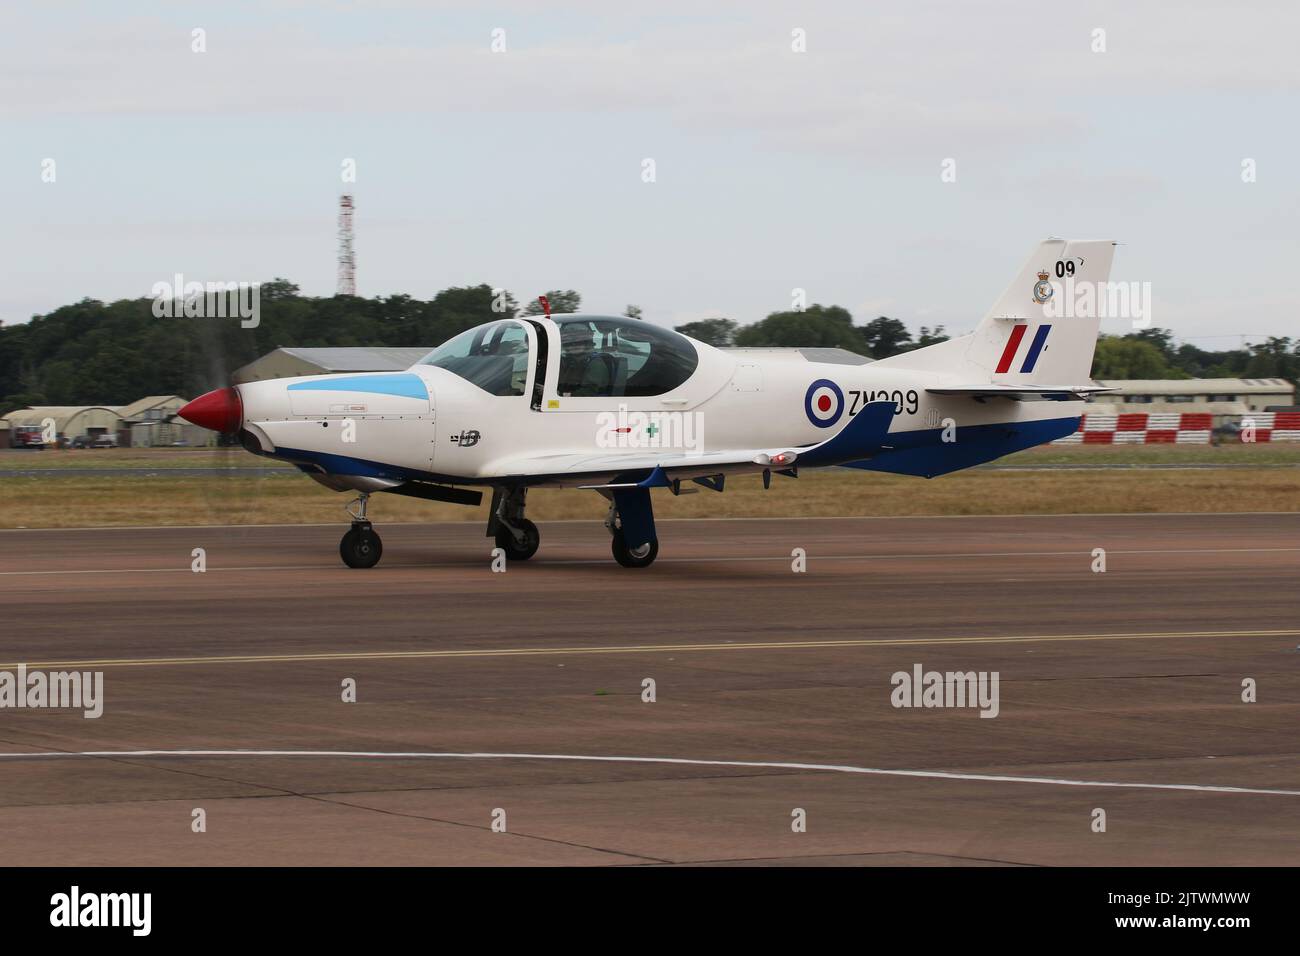 ZM309, a Grob Prefect T1 operated by the Royal Air Force (RAF), arriving at RAF Fairford in Gloucestershire, England, to participate in the Royal International Air Tattoo 2022 (RIAT 2022). Stock Photo